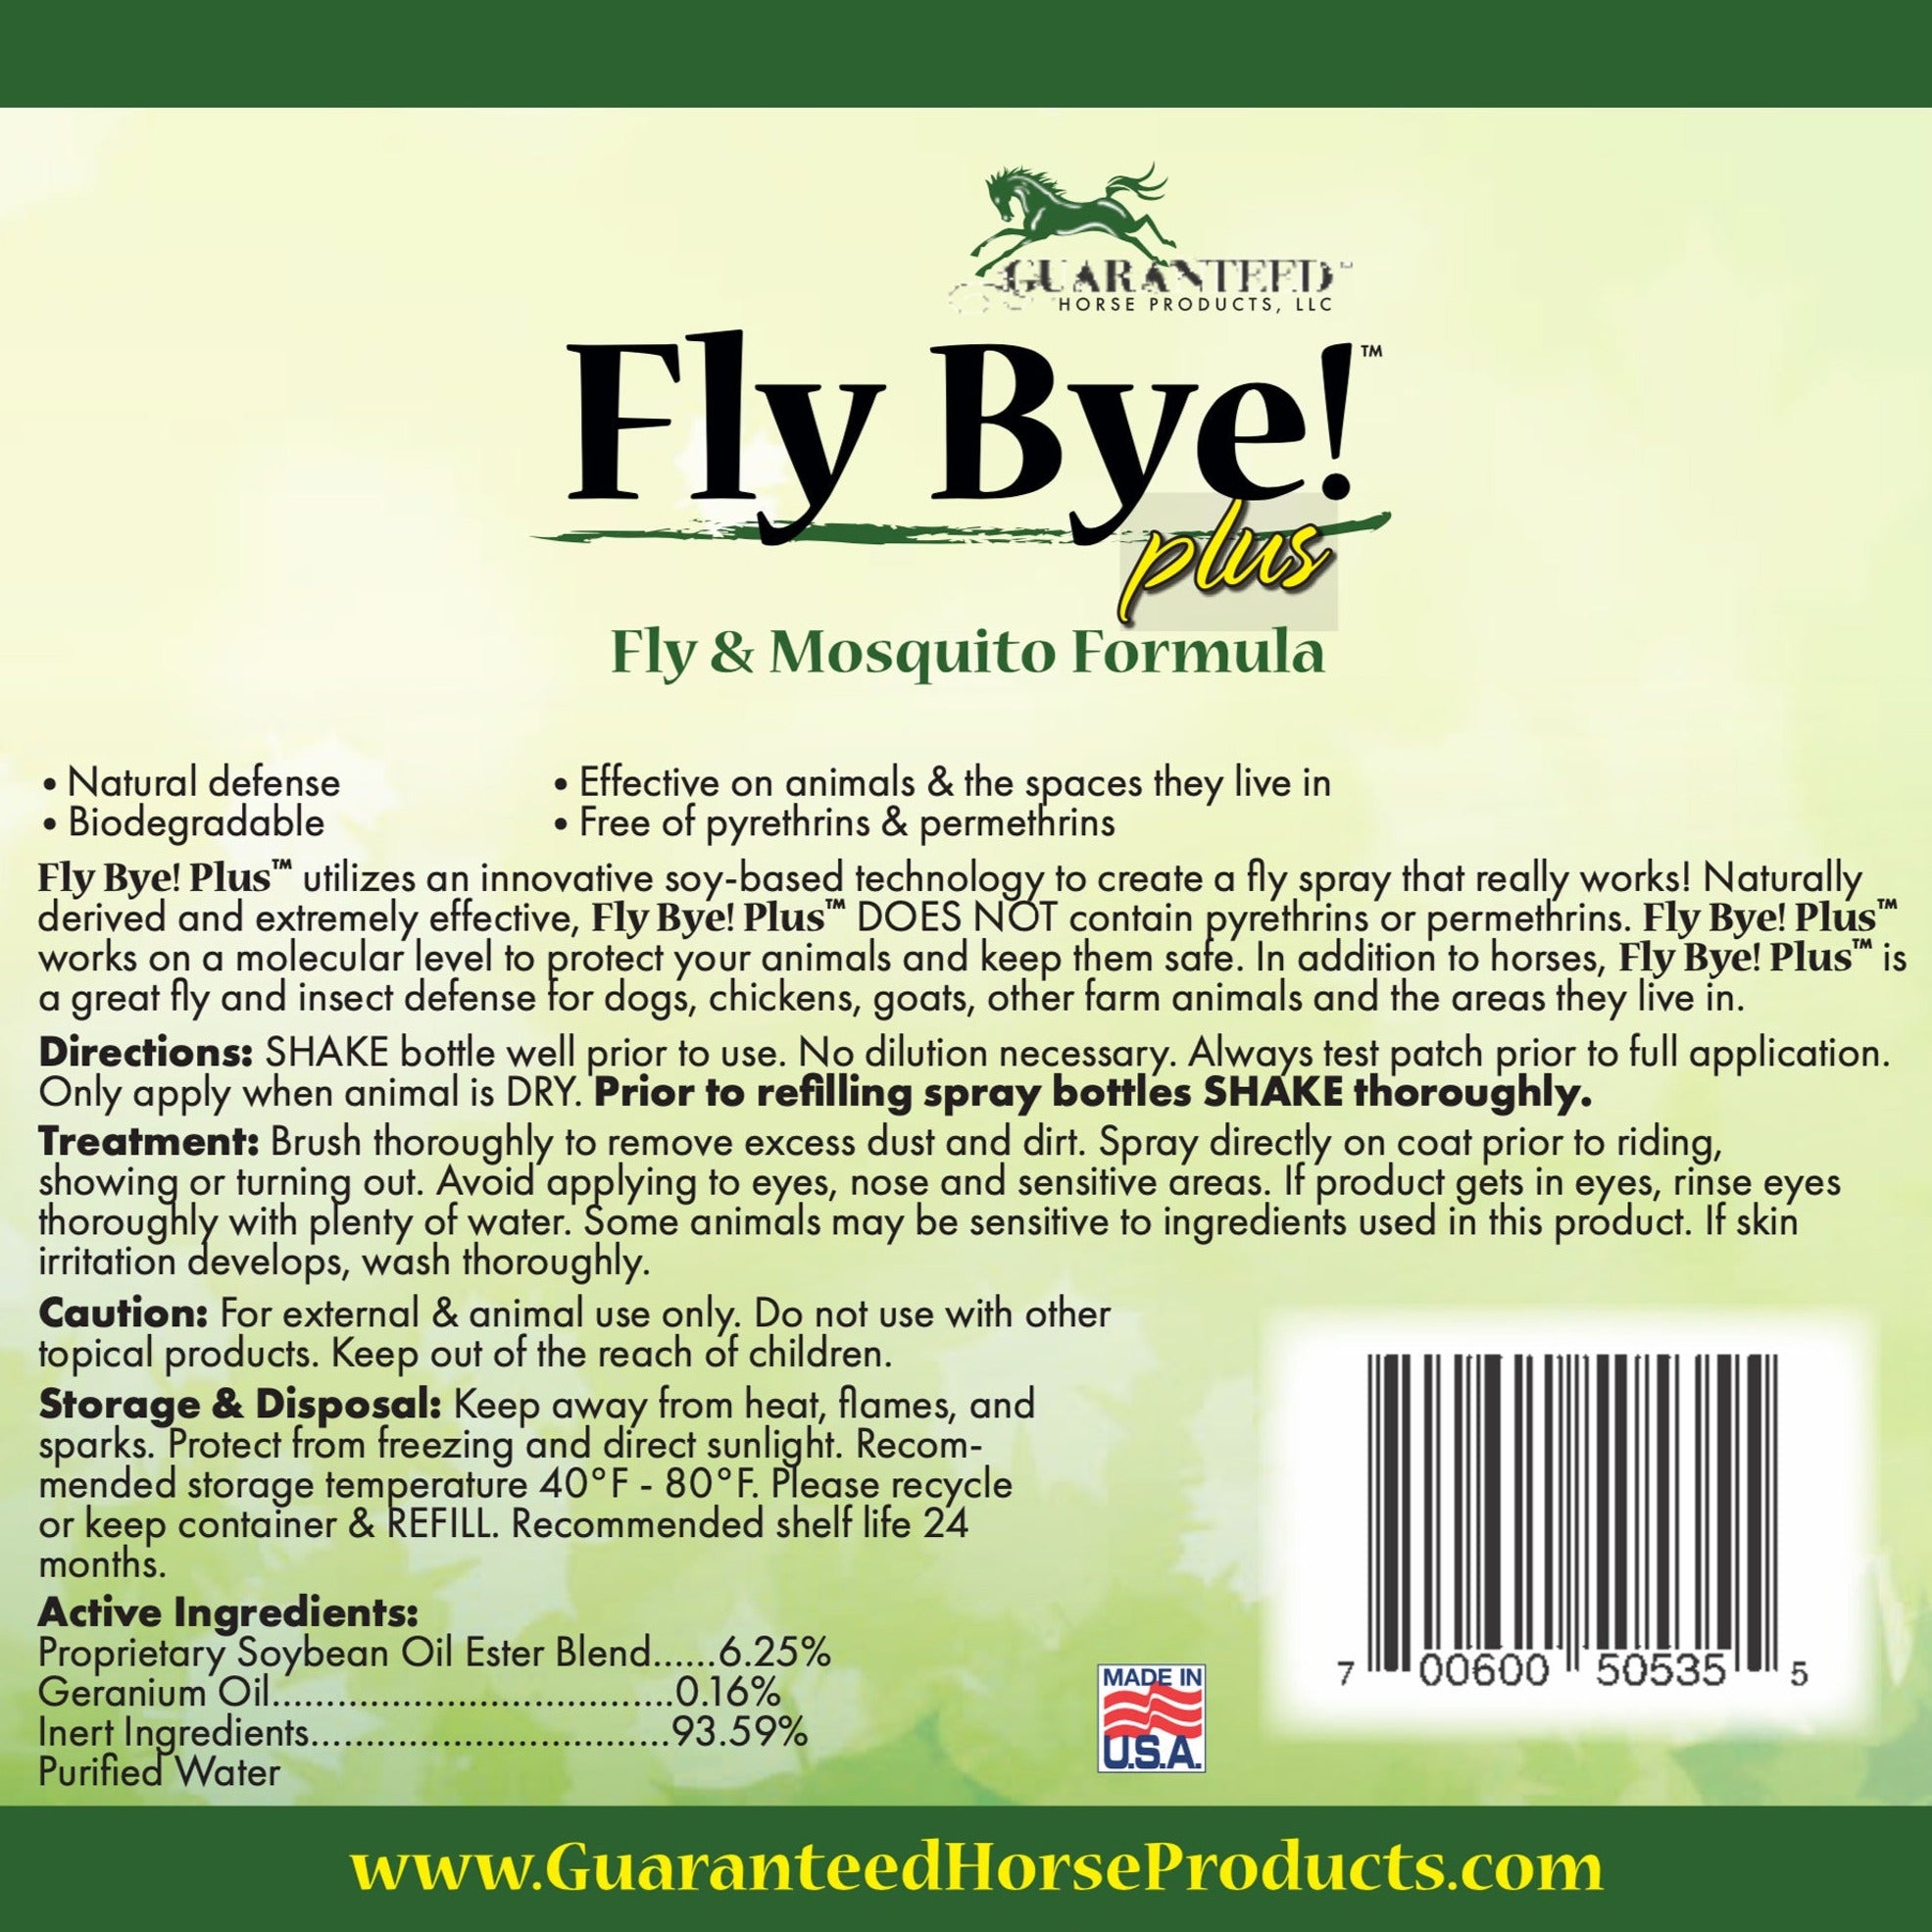 Fly Bye! Plus 2.5 gallon horse fly spray and mosquito spray label and directions